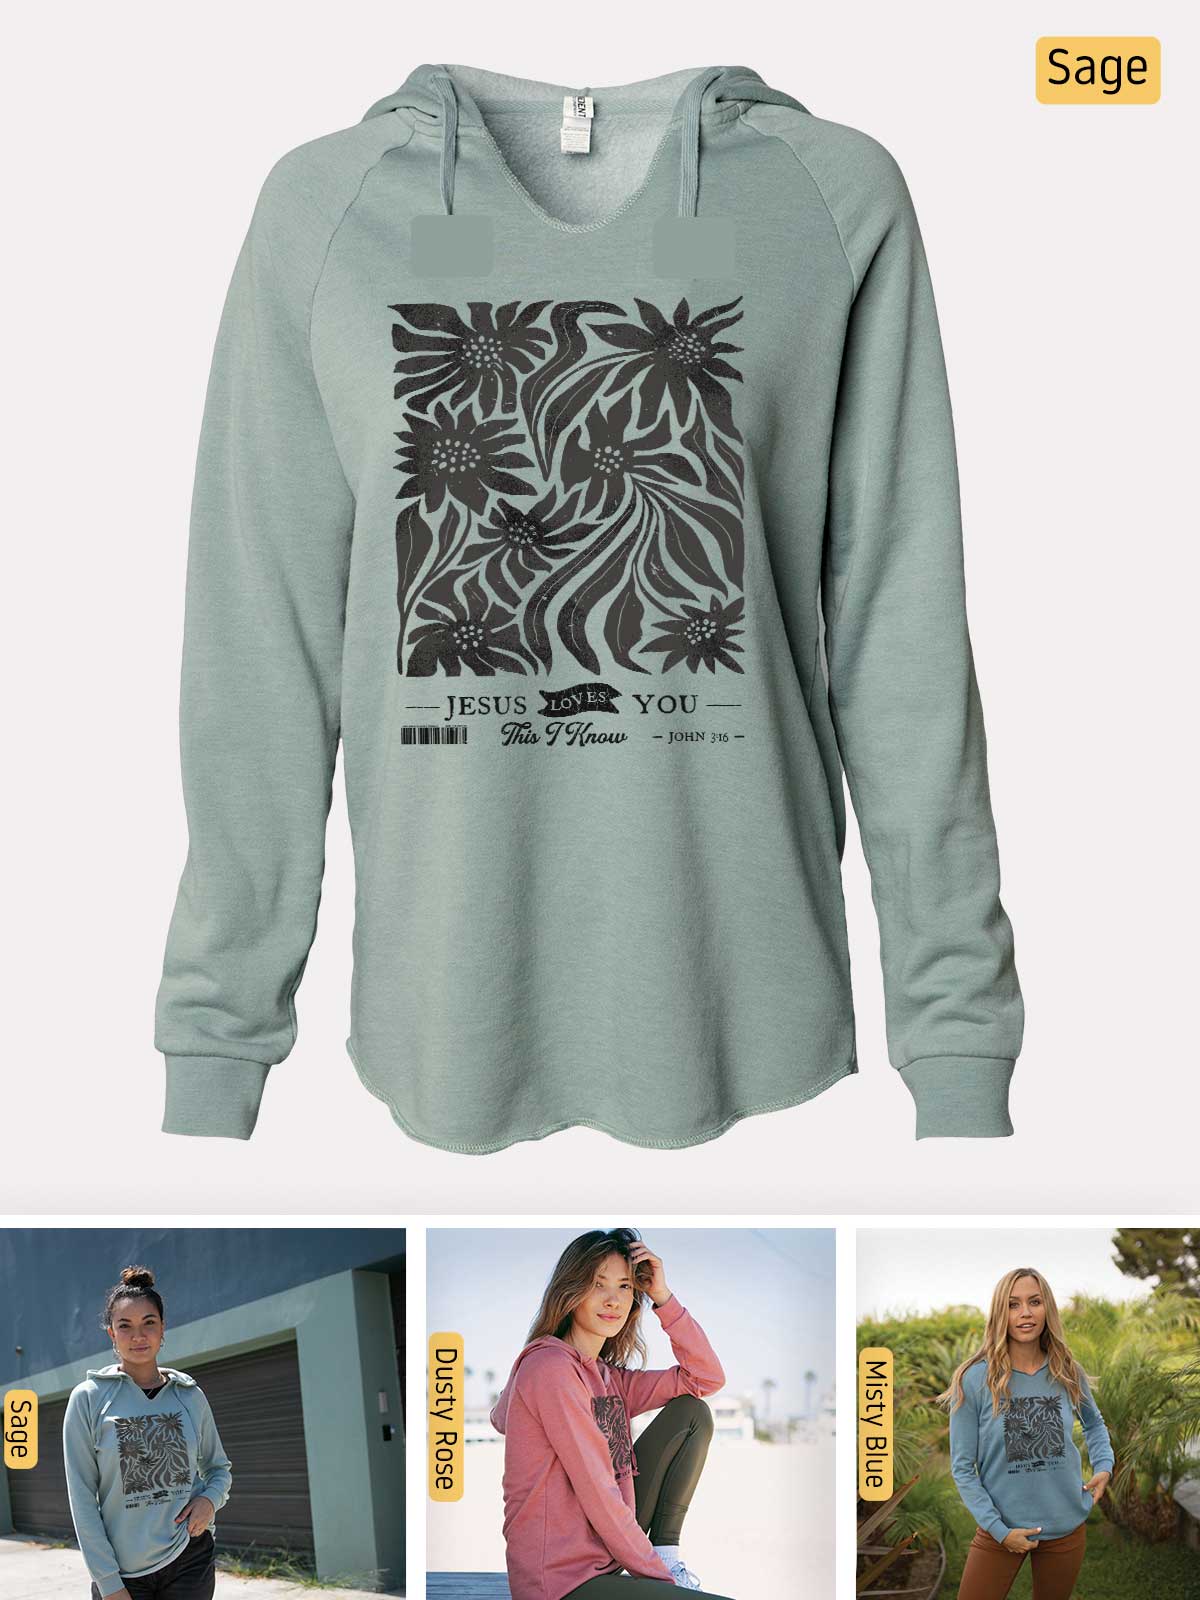 a women's sweatshirt with an image of a woman sitting on a bench